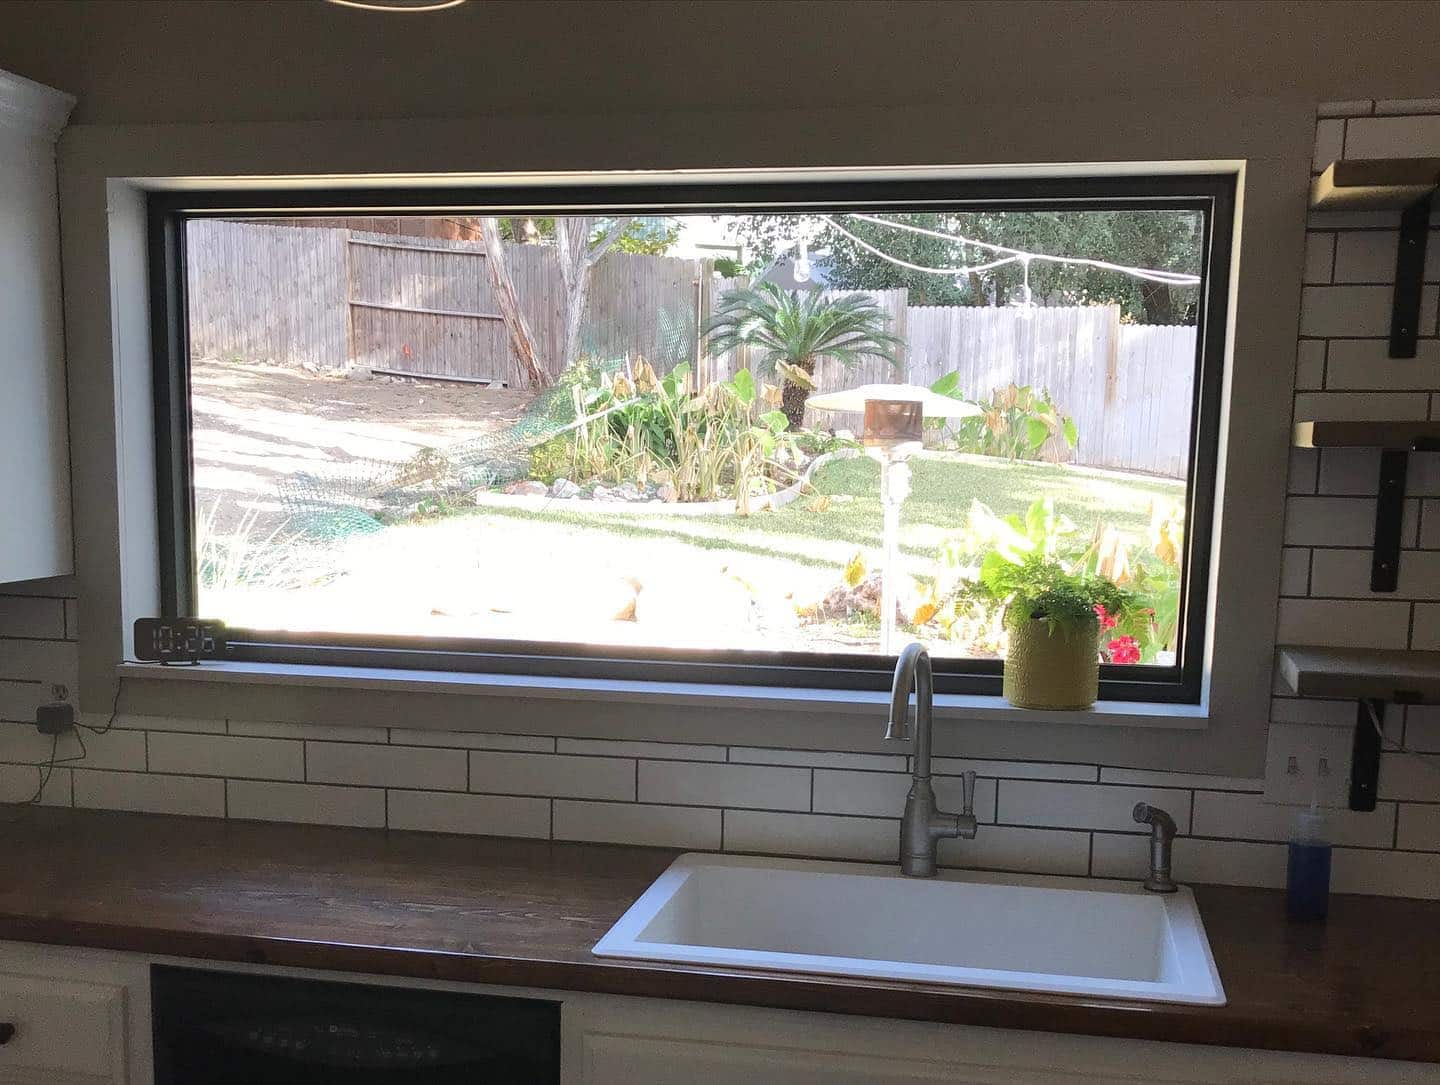 Modern kitchen window overlooking a well-maintained garden after renovation in San Antonio.